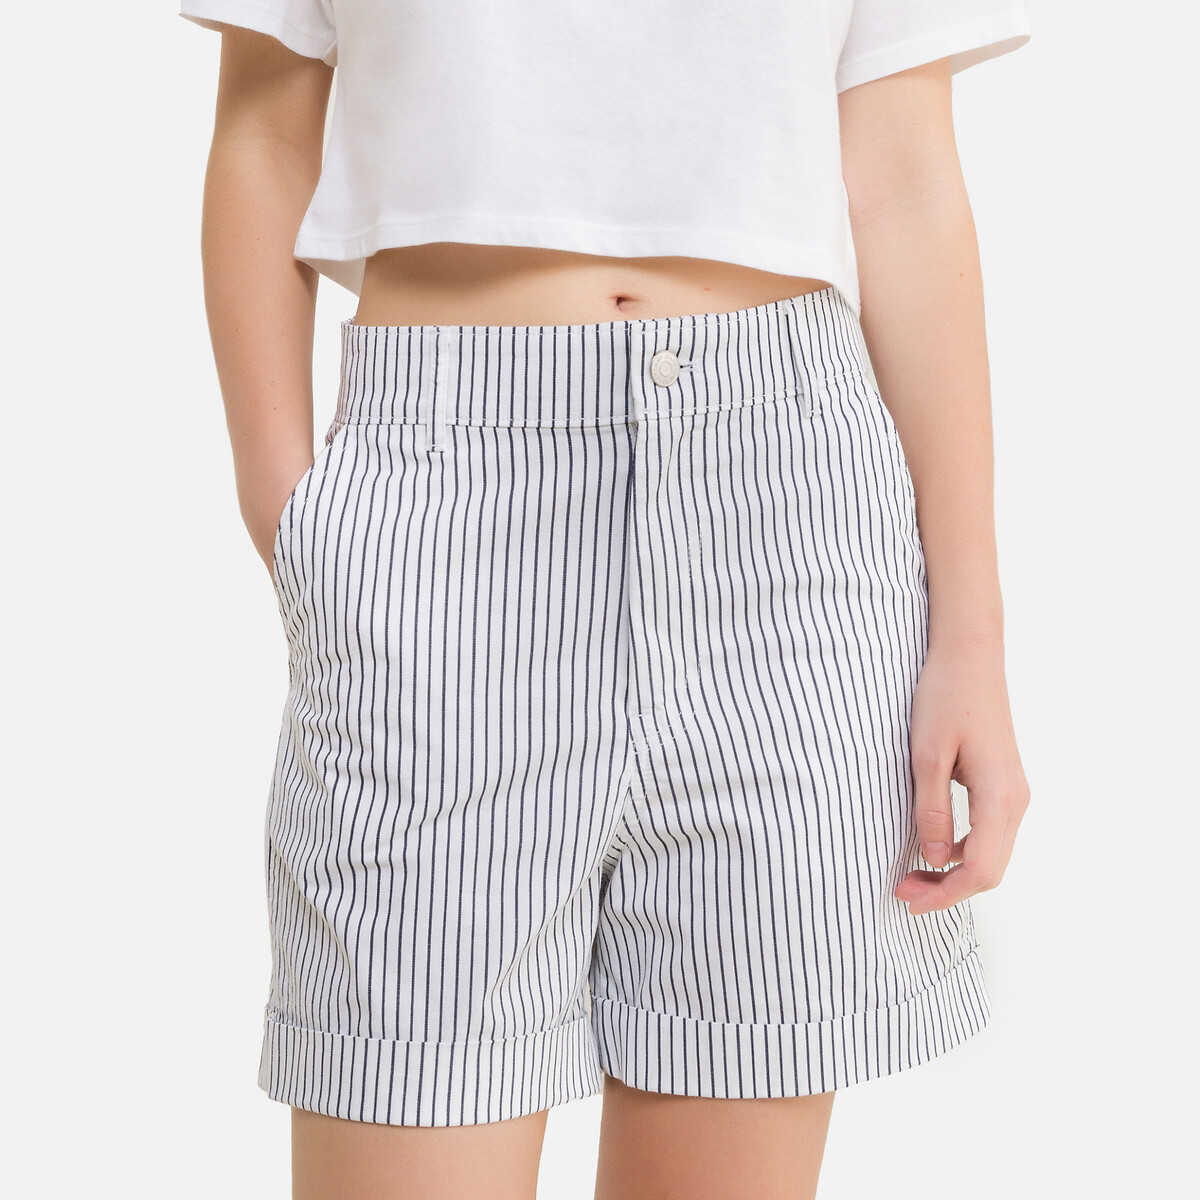 blue-and-white-striped-shorts-womens-hilltopstory